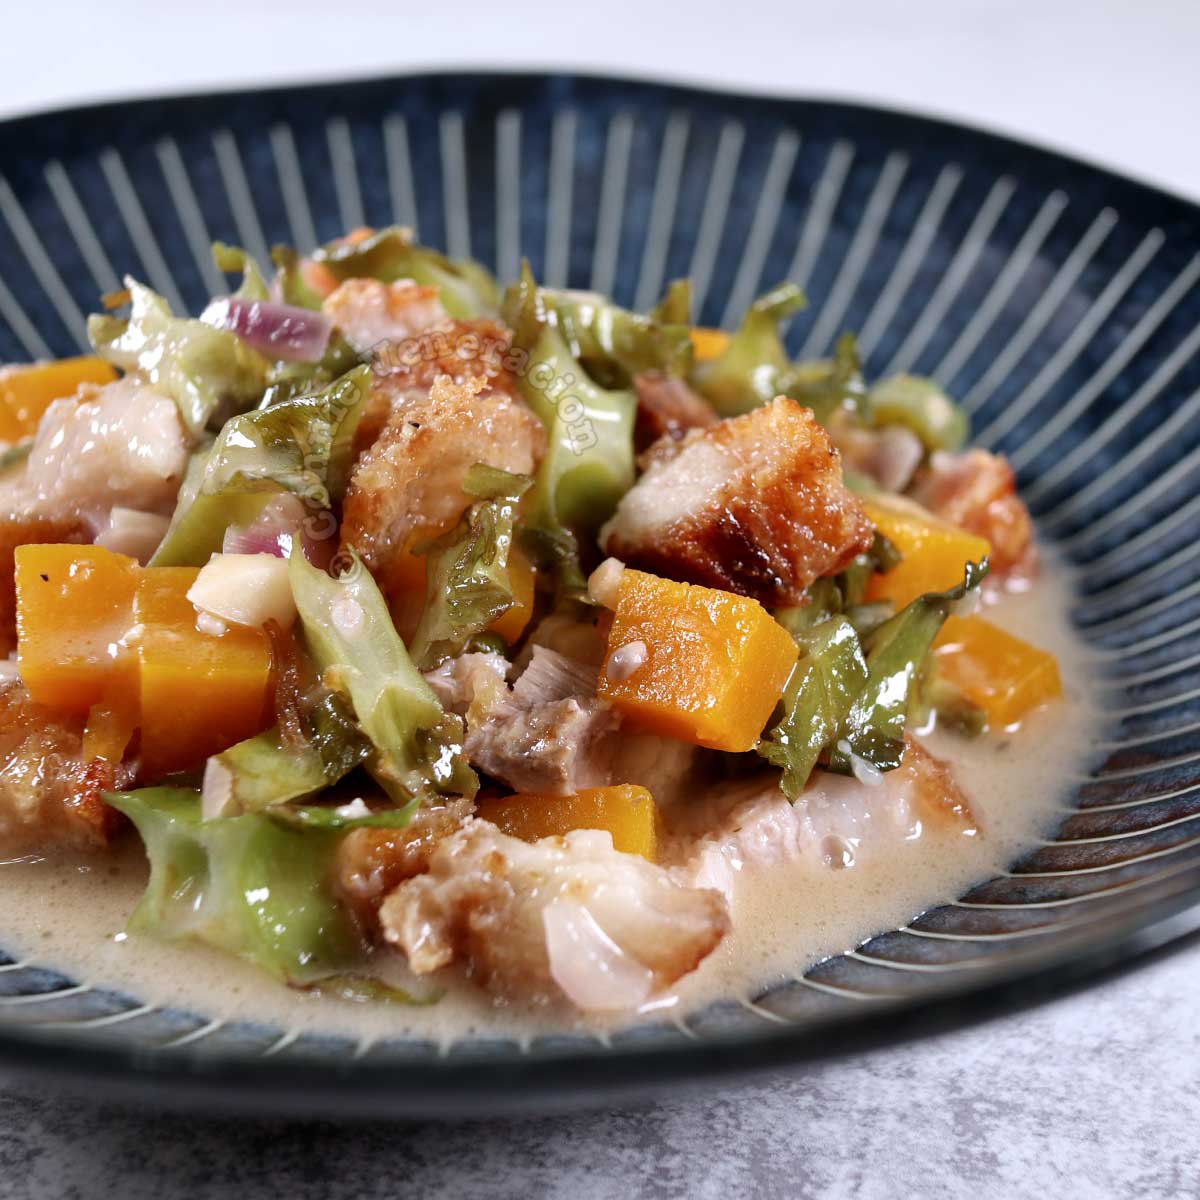 Gising-gising (a spicy Filipino dish of pork and vegetables cooked in coconut milk)